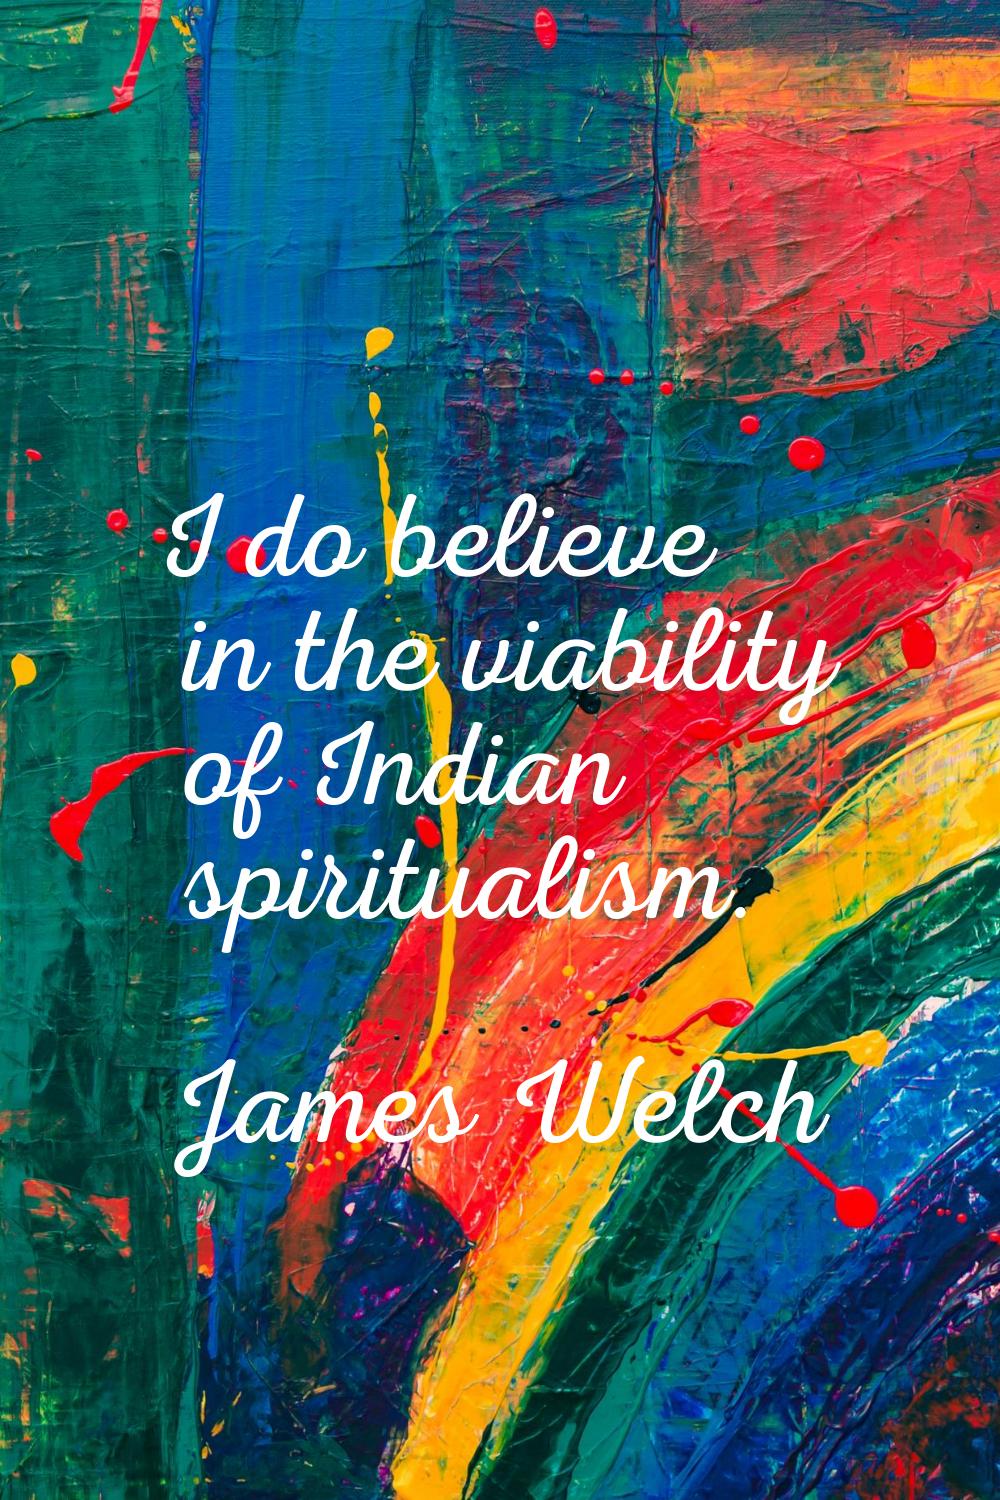 I do believe in the viability of Indian spiritualism.